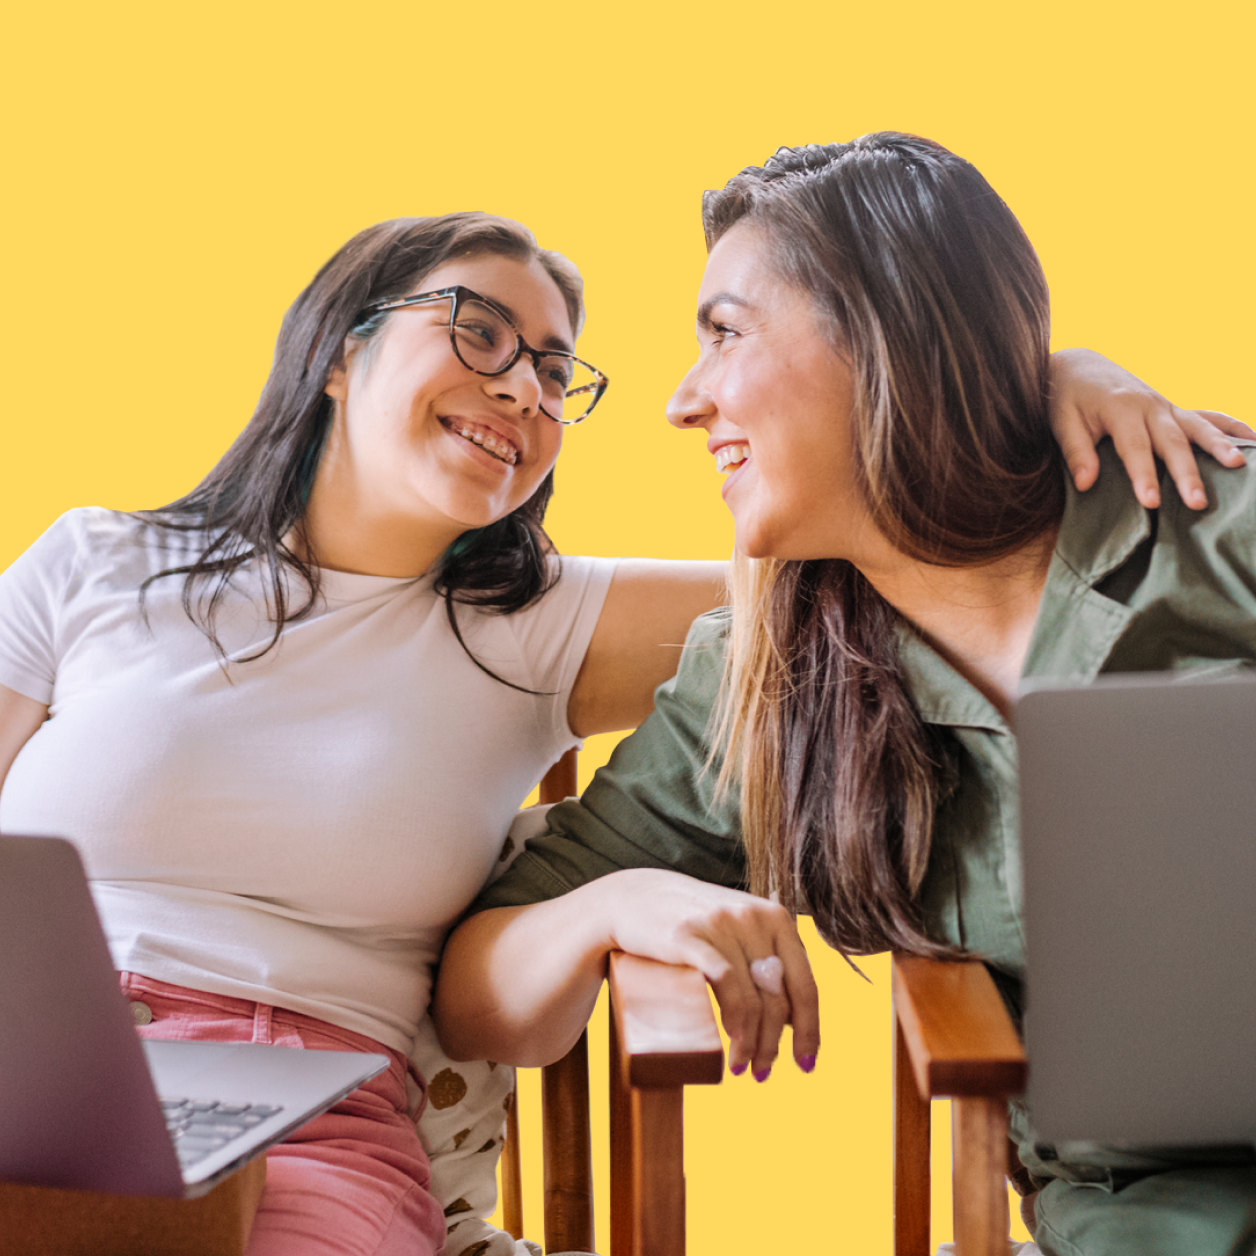 Teenage girl and mom with laptops laughing together, girl's arm around her mother